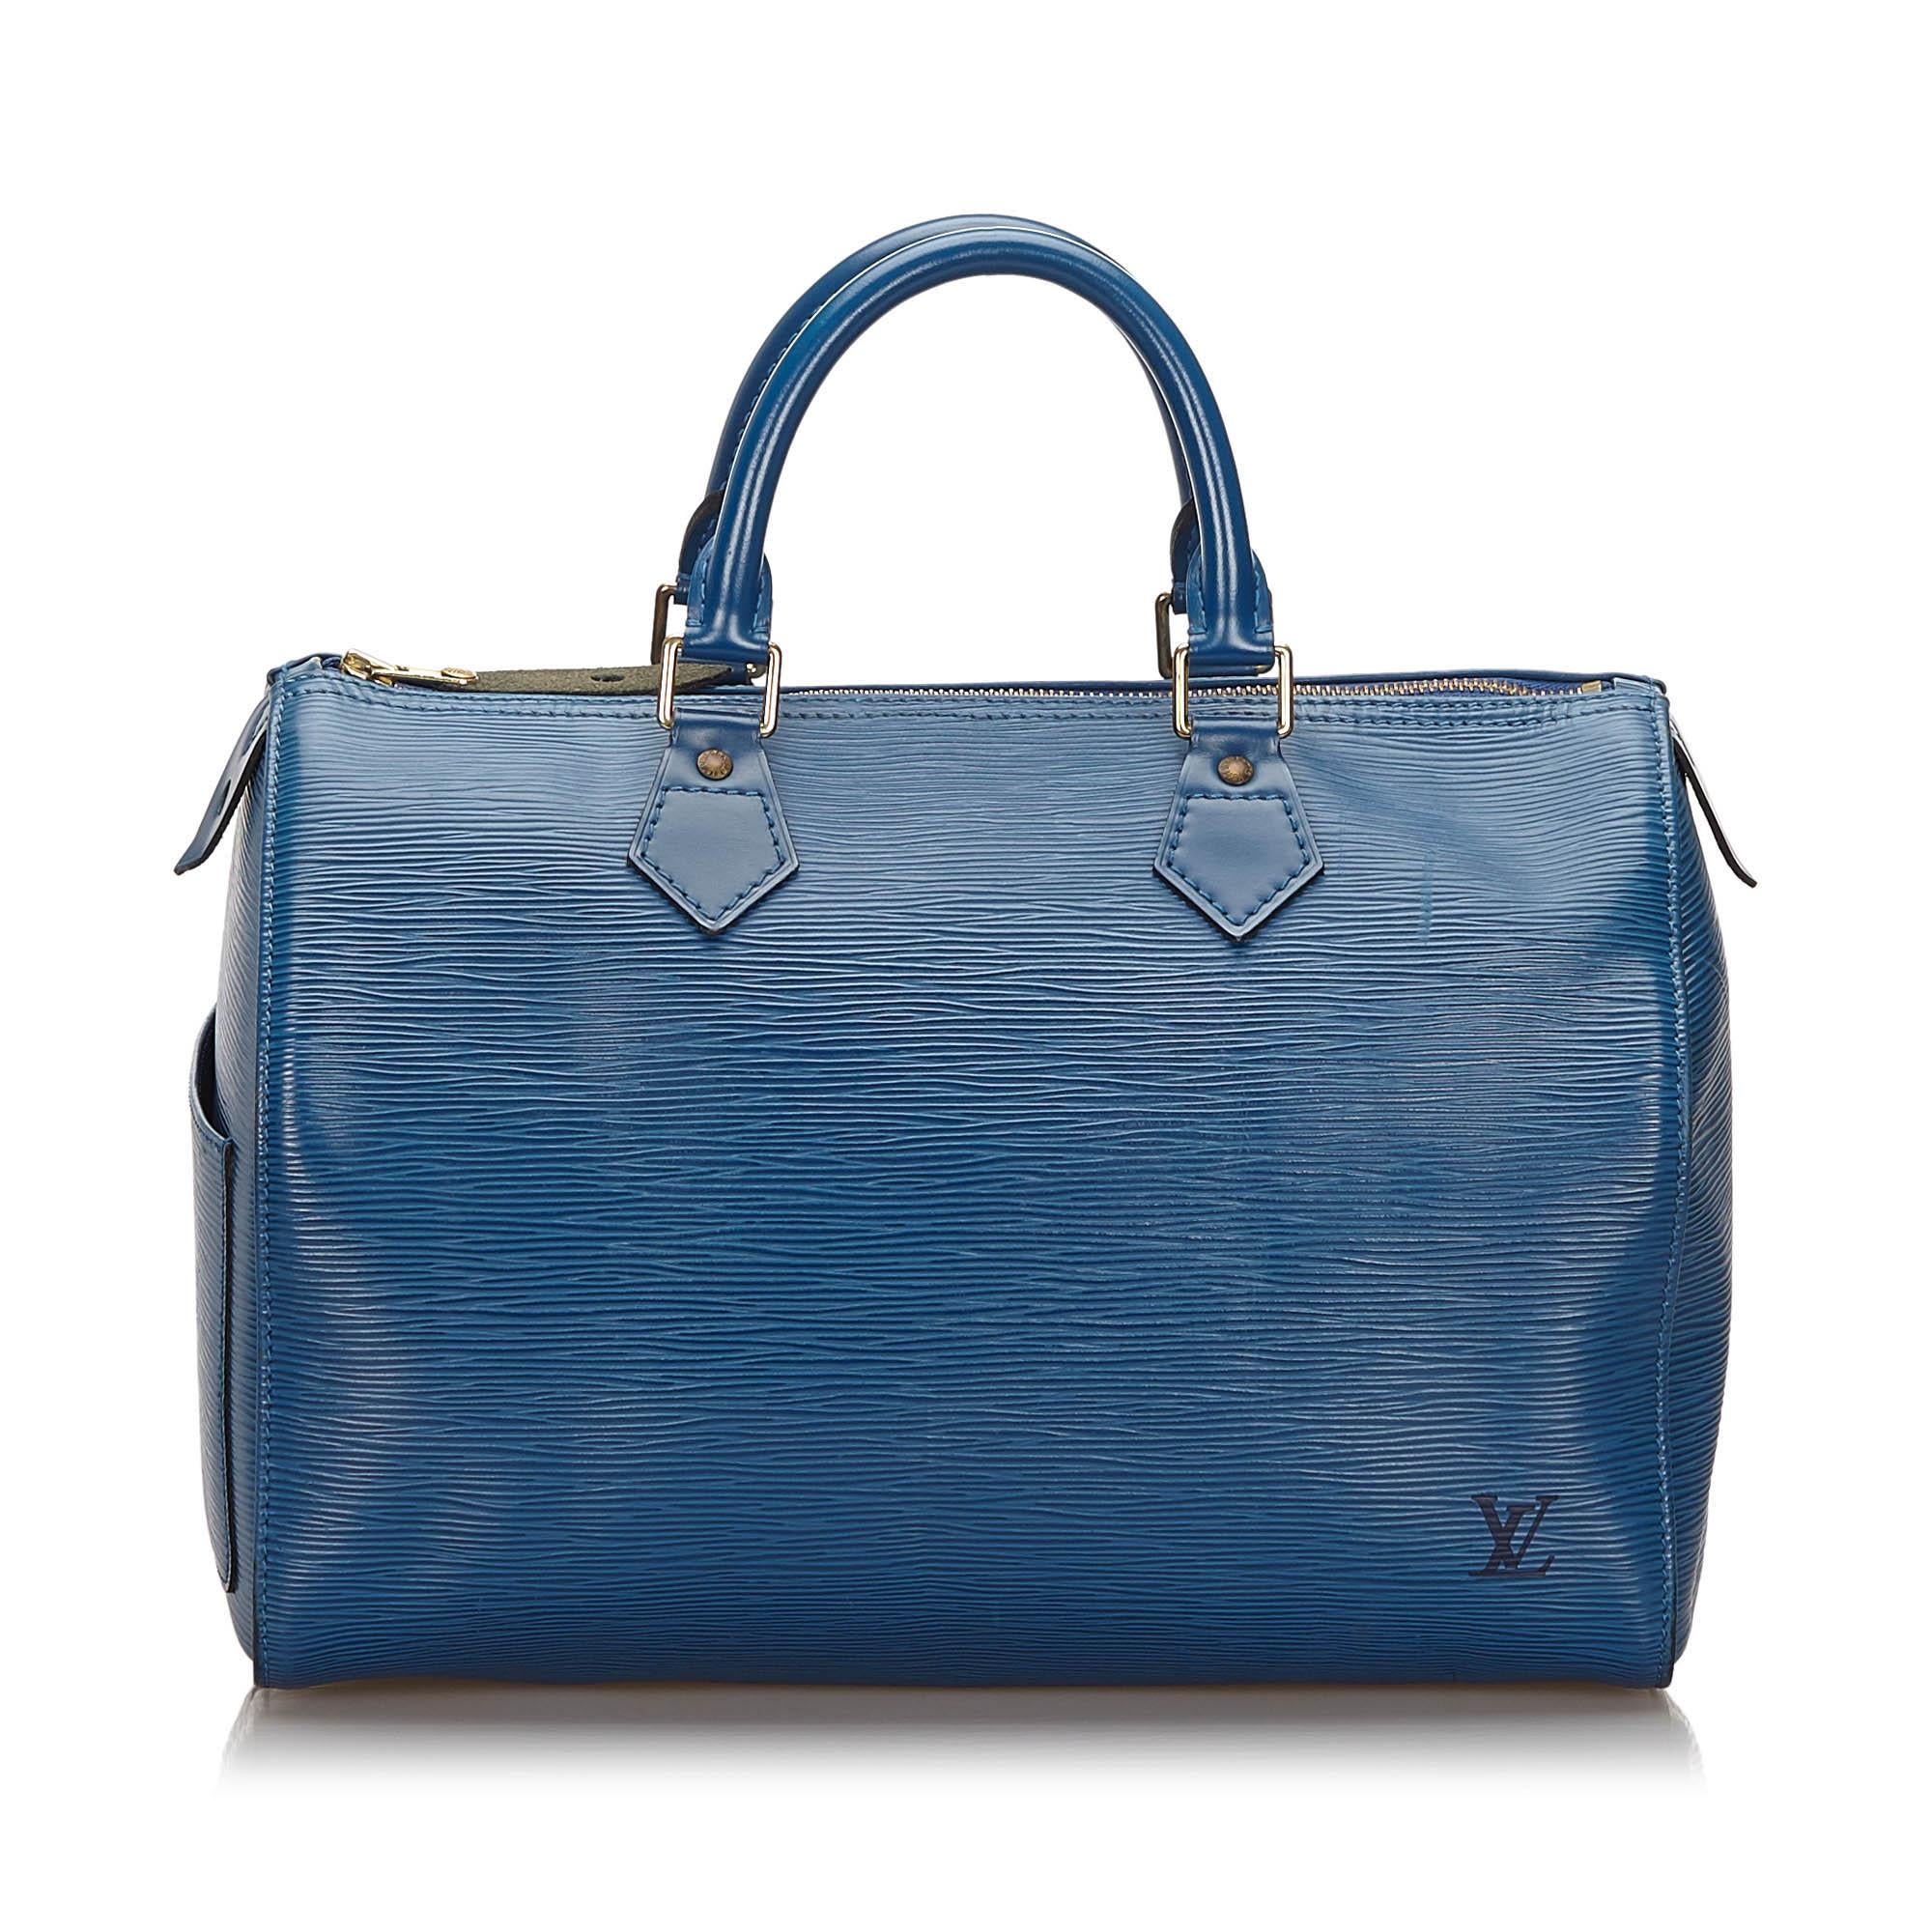 Vintage Authentic Louis Vuitton Blue Epi Leather Speedy 30 France MEDIUM  In Good Condition For Sale In Orlando, FL